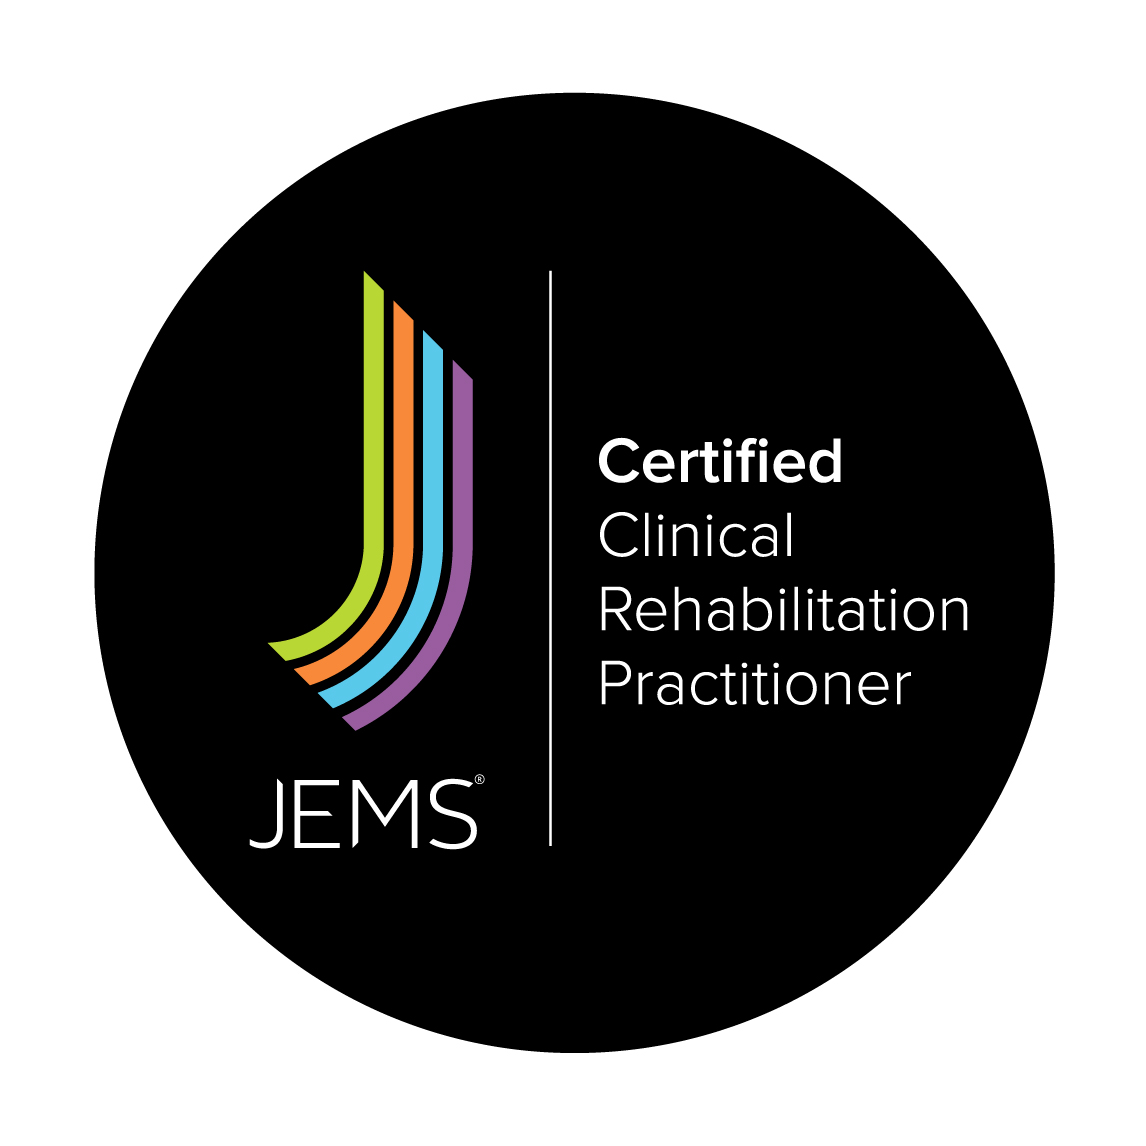 Heather Gibson is a certified clinical rehabilitation JEMS practitioner